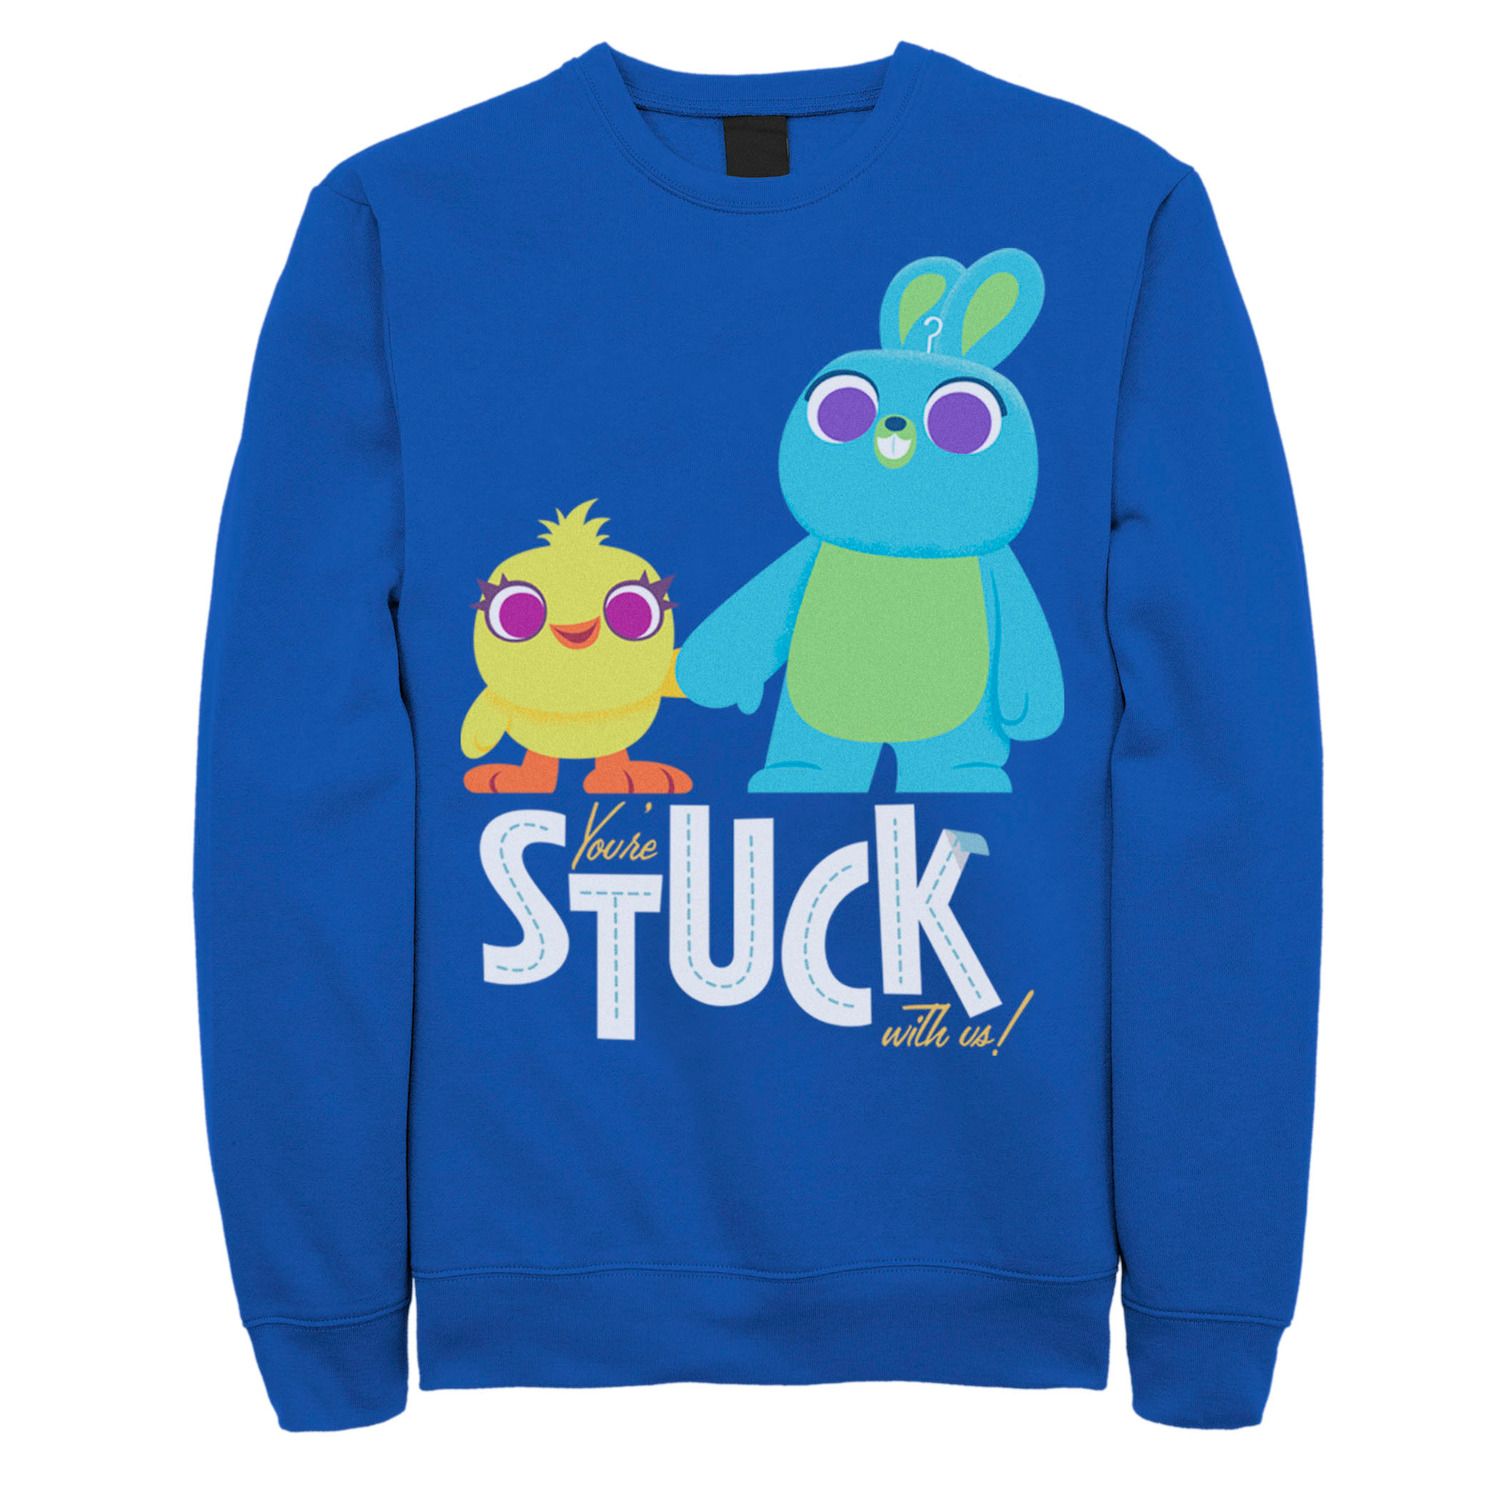 Image for Disney / Pixar Men's Toy Story 4 Ducky & Bunny Stuck With Us Sweatshirt at Kohl's.